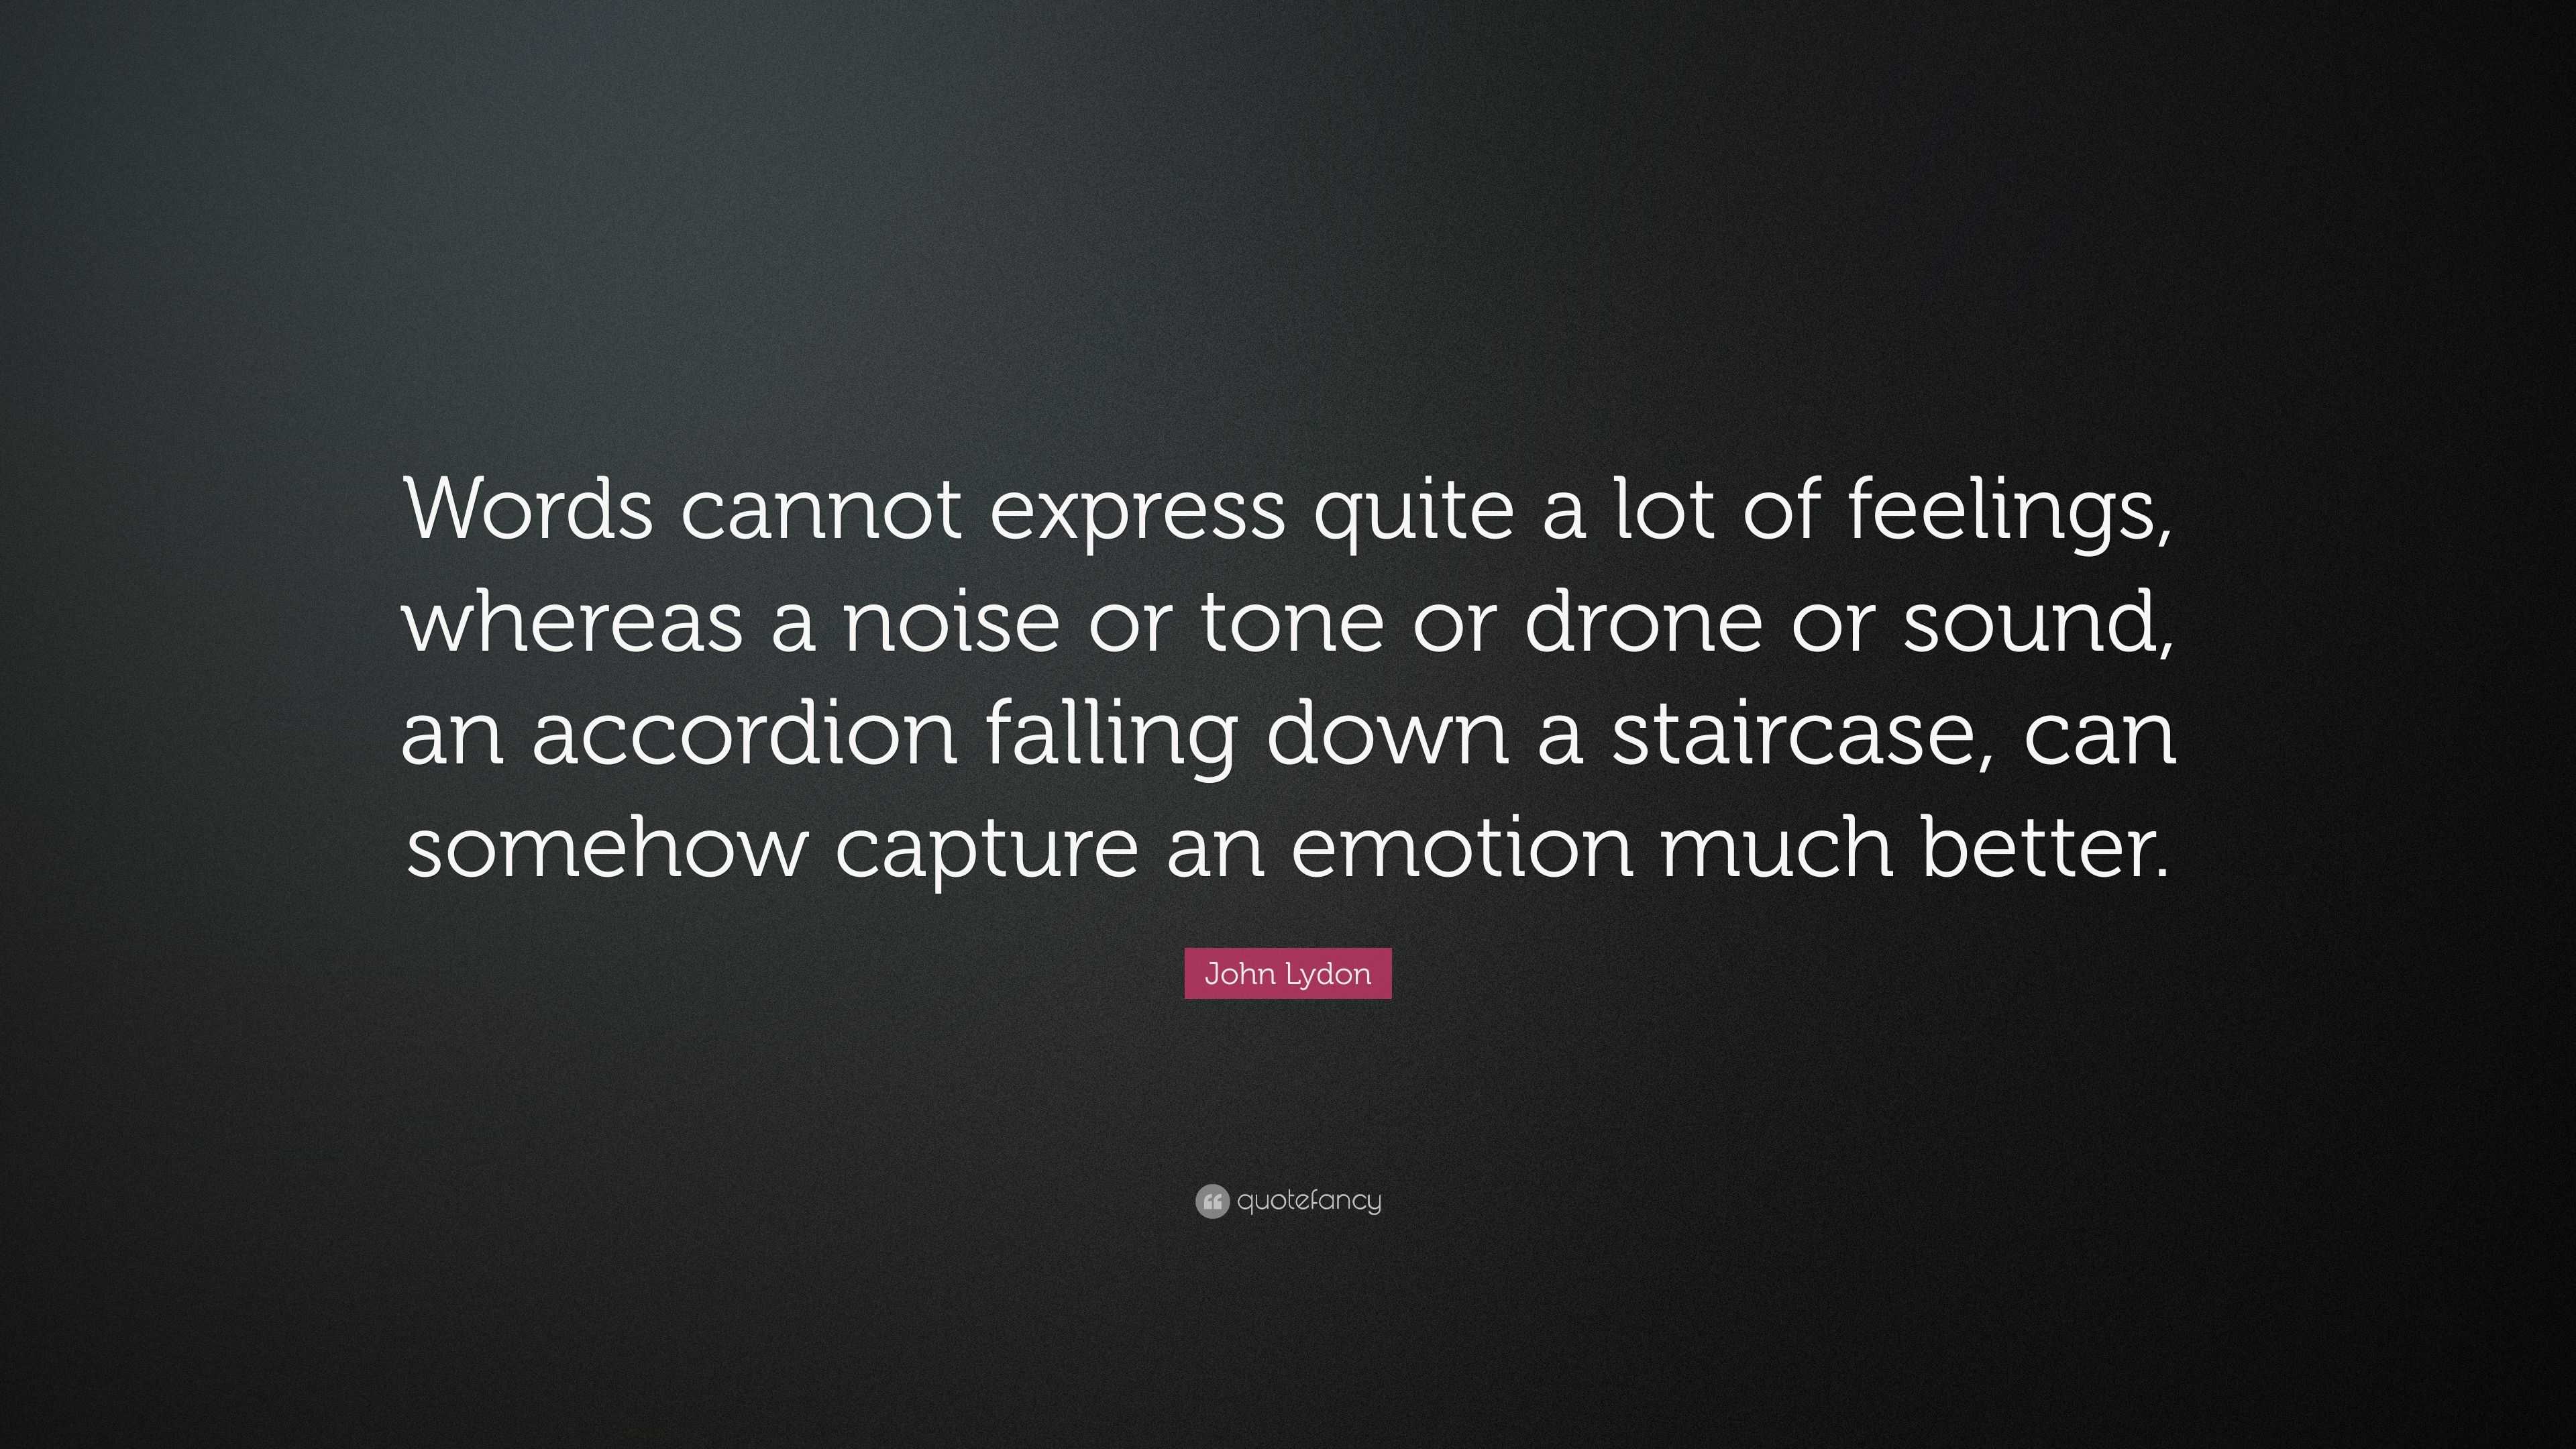 https://quotefancy.com/media/wallpaper/3840x2160/3881173-John-Lydon-Quote-Words-cannot-express-quite-a-lot-of-feelings.jpg